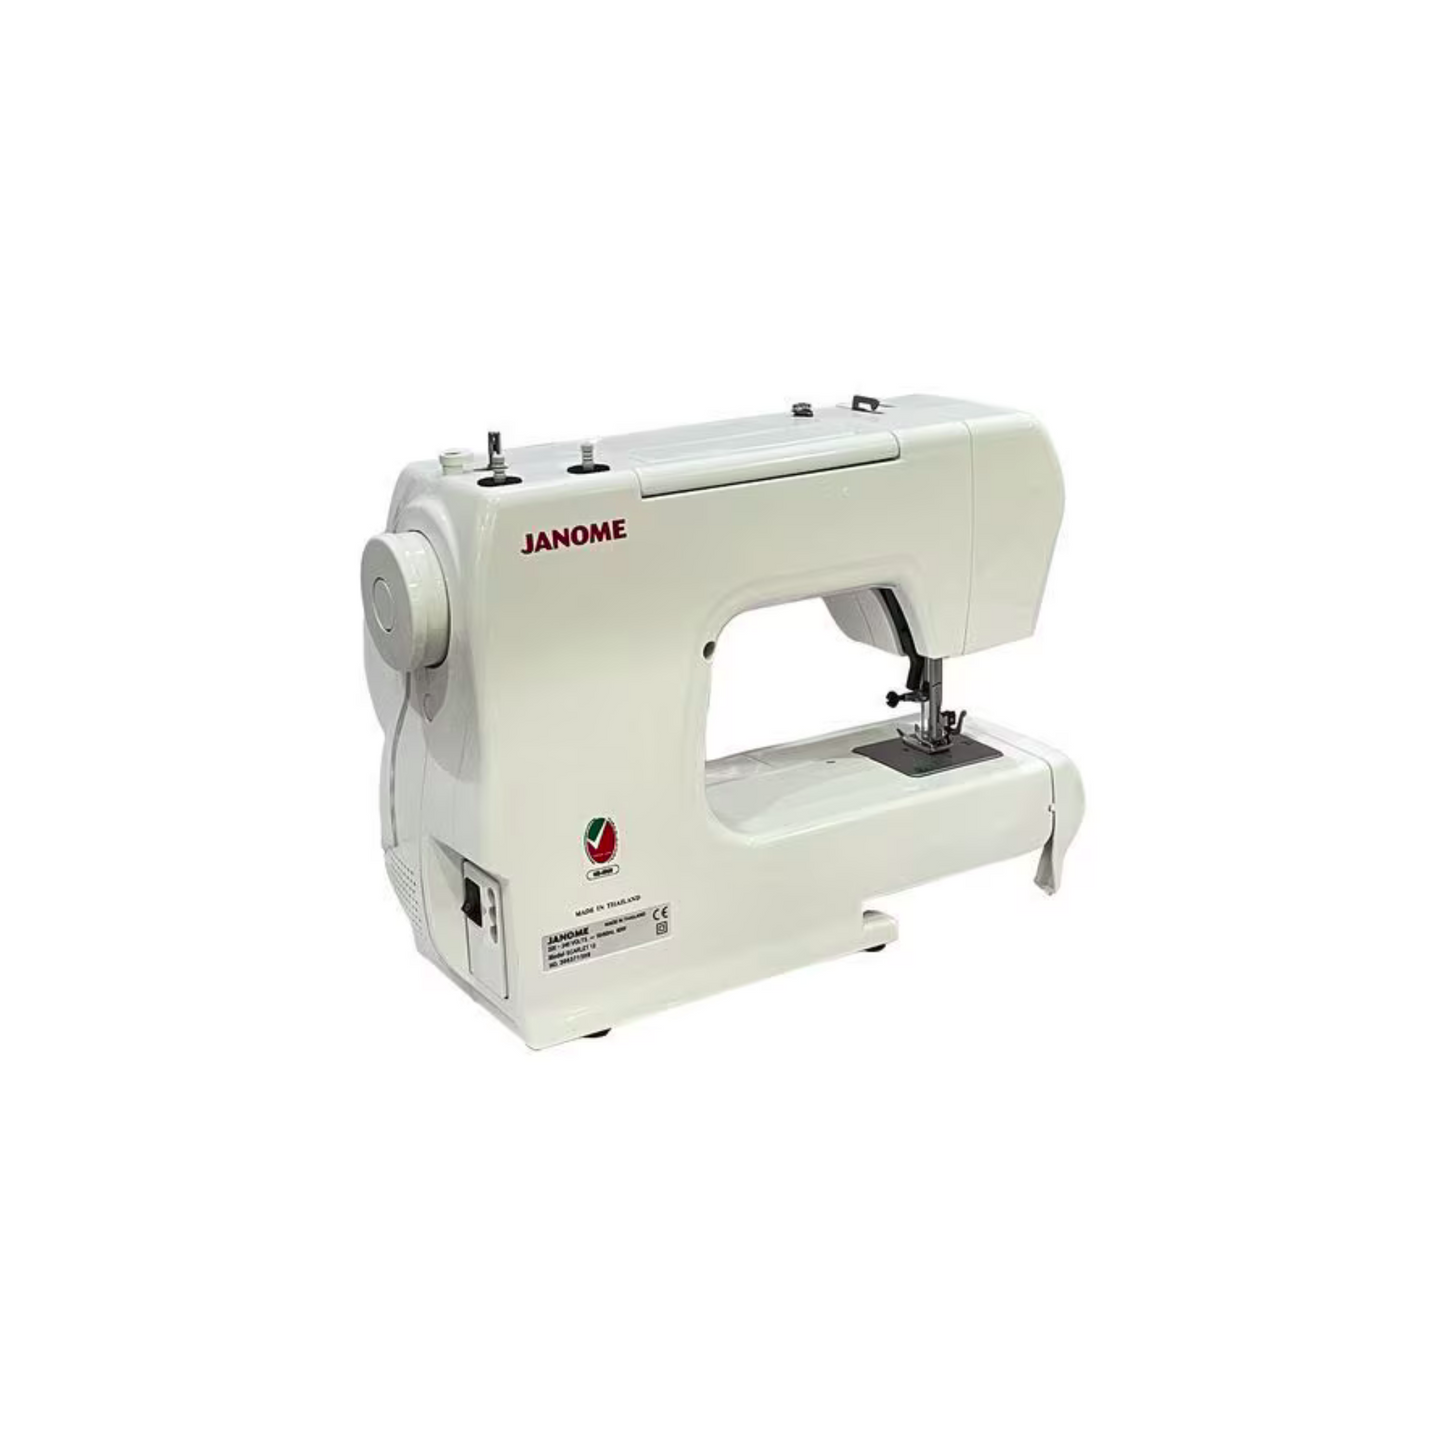 Janome scarlet 12 tailoring portable machine - Sewing machine - White - Side view